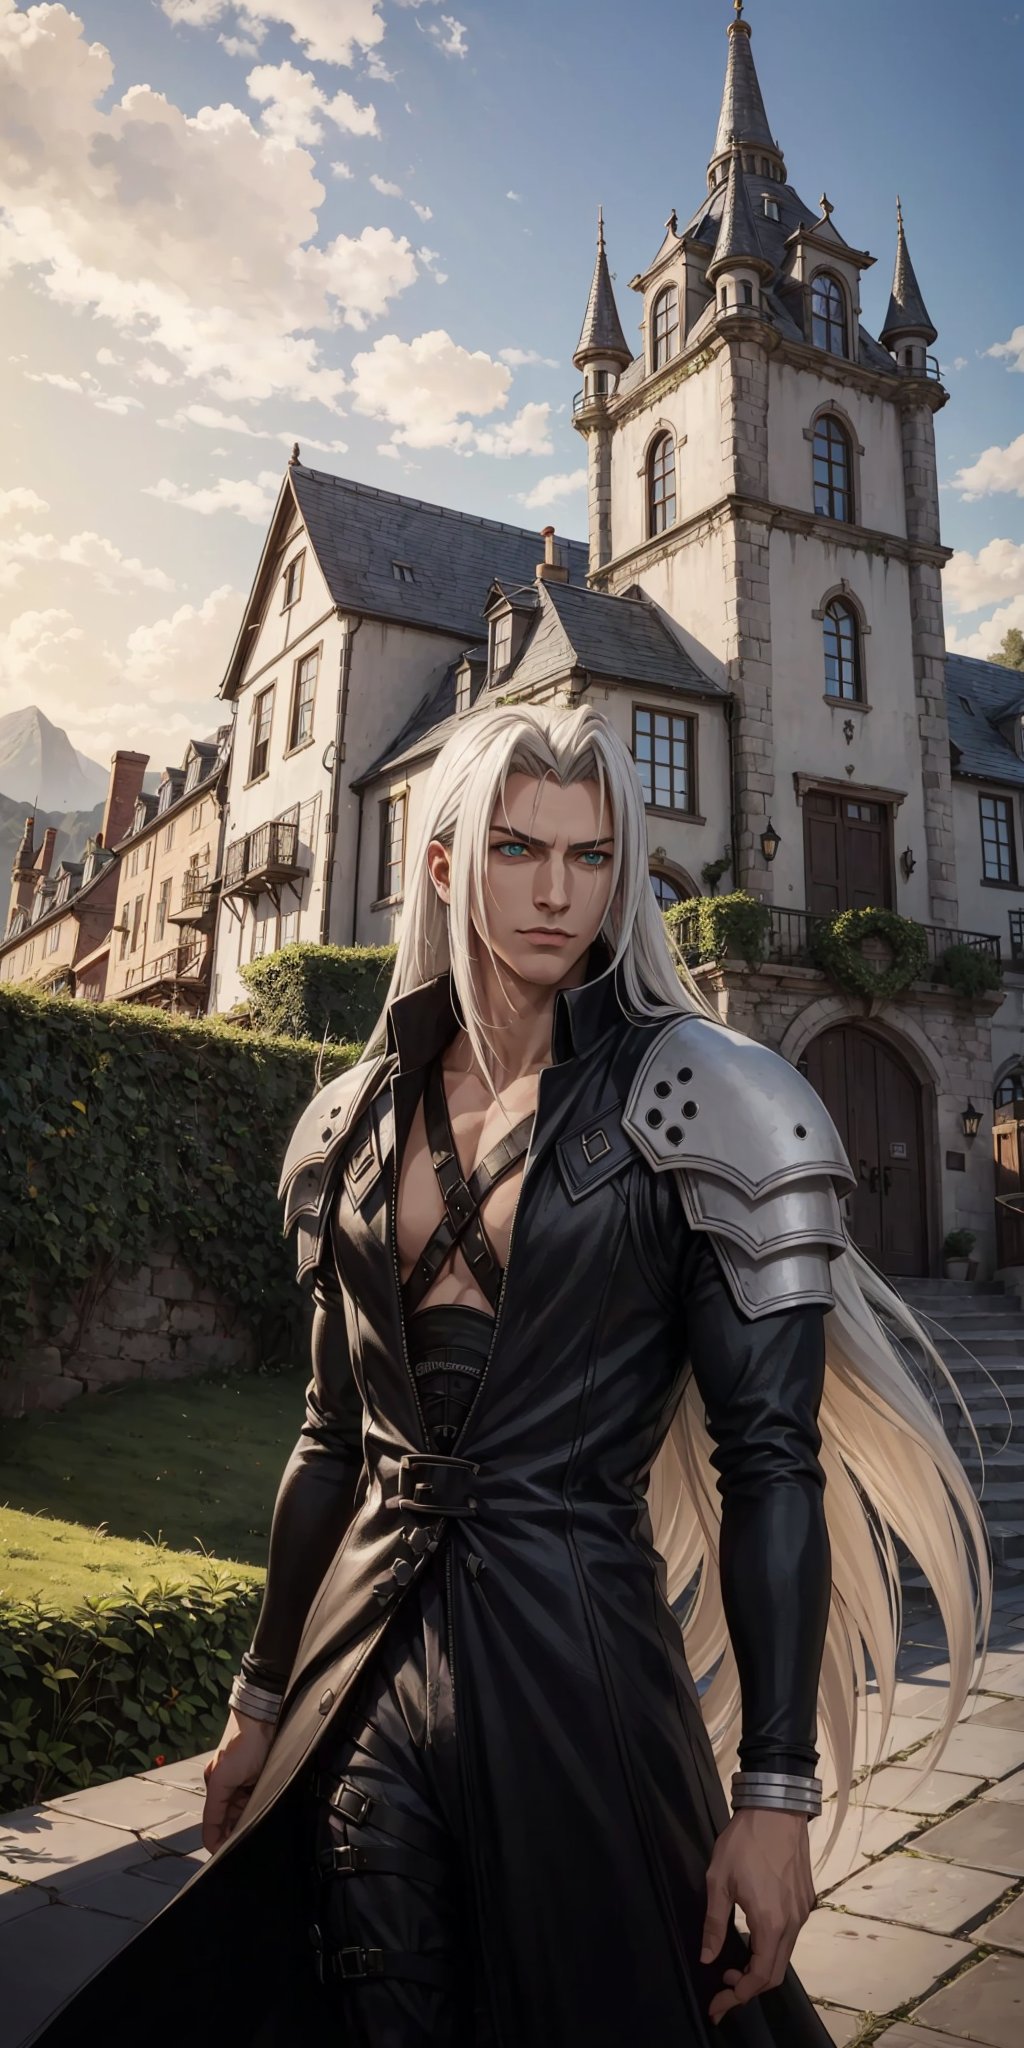 Sephiroth (Final Fantasy),confident,arrogant,picture perfect face,entrence to small village,tavern,townsquare,broken down car,giant mansion on hill,omnious spiked mountains